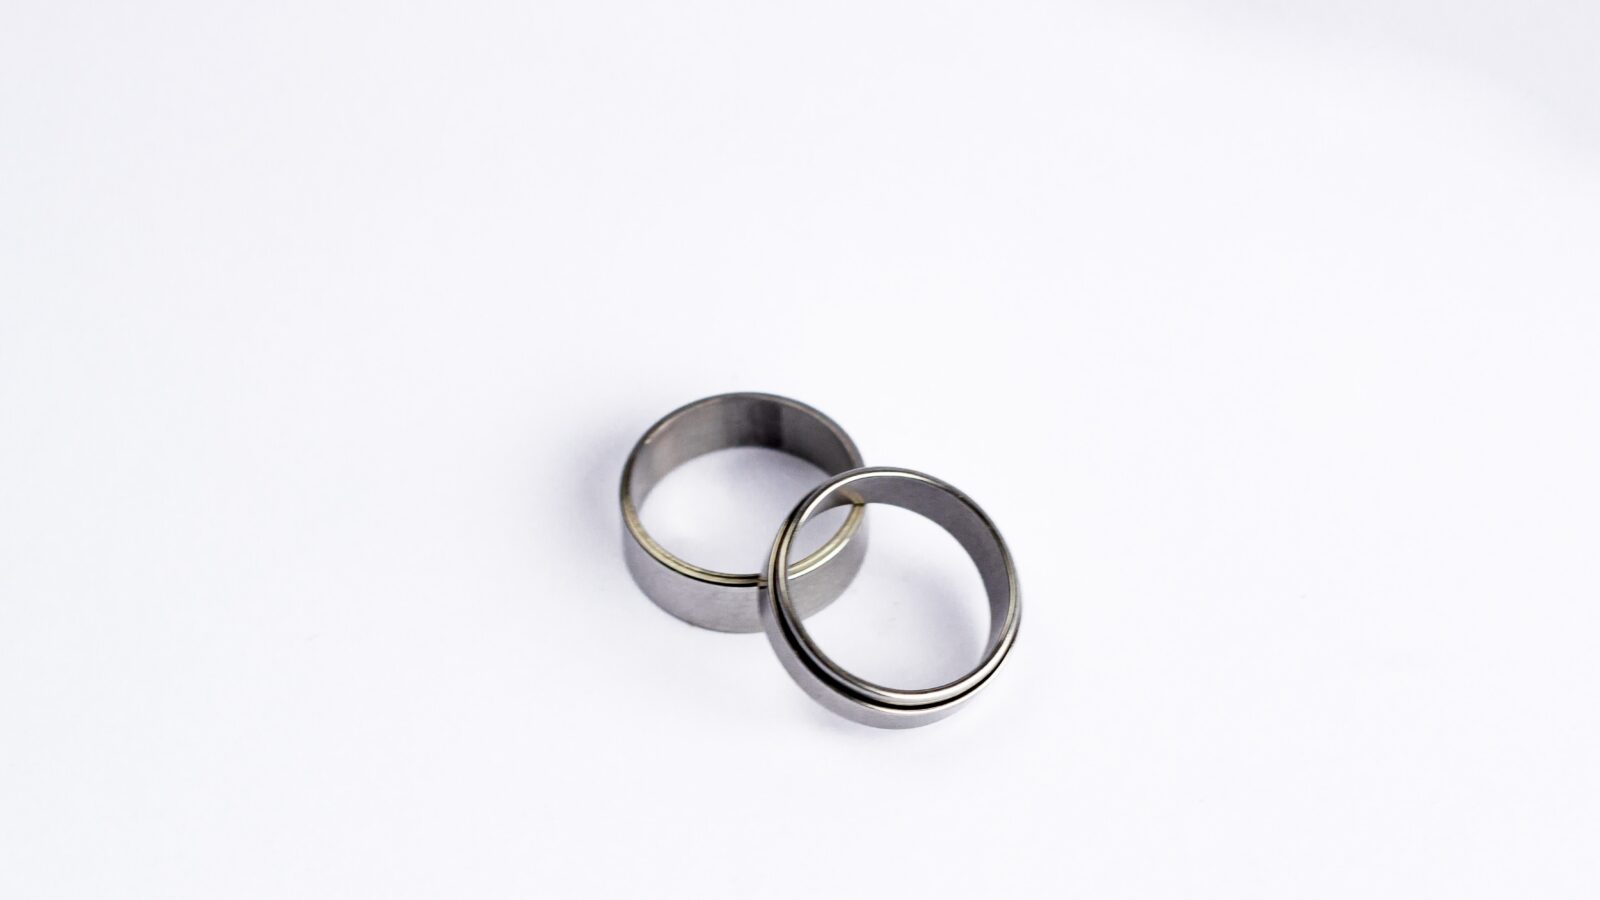 Wedding rings representing formalities to determine if the marriage is valid